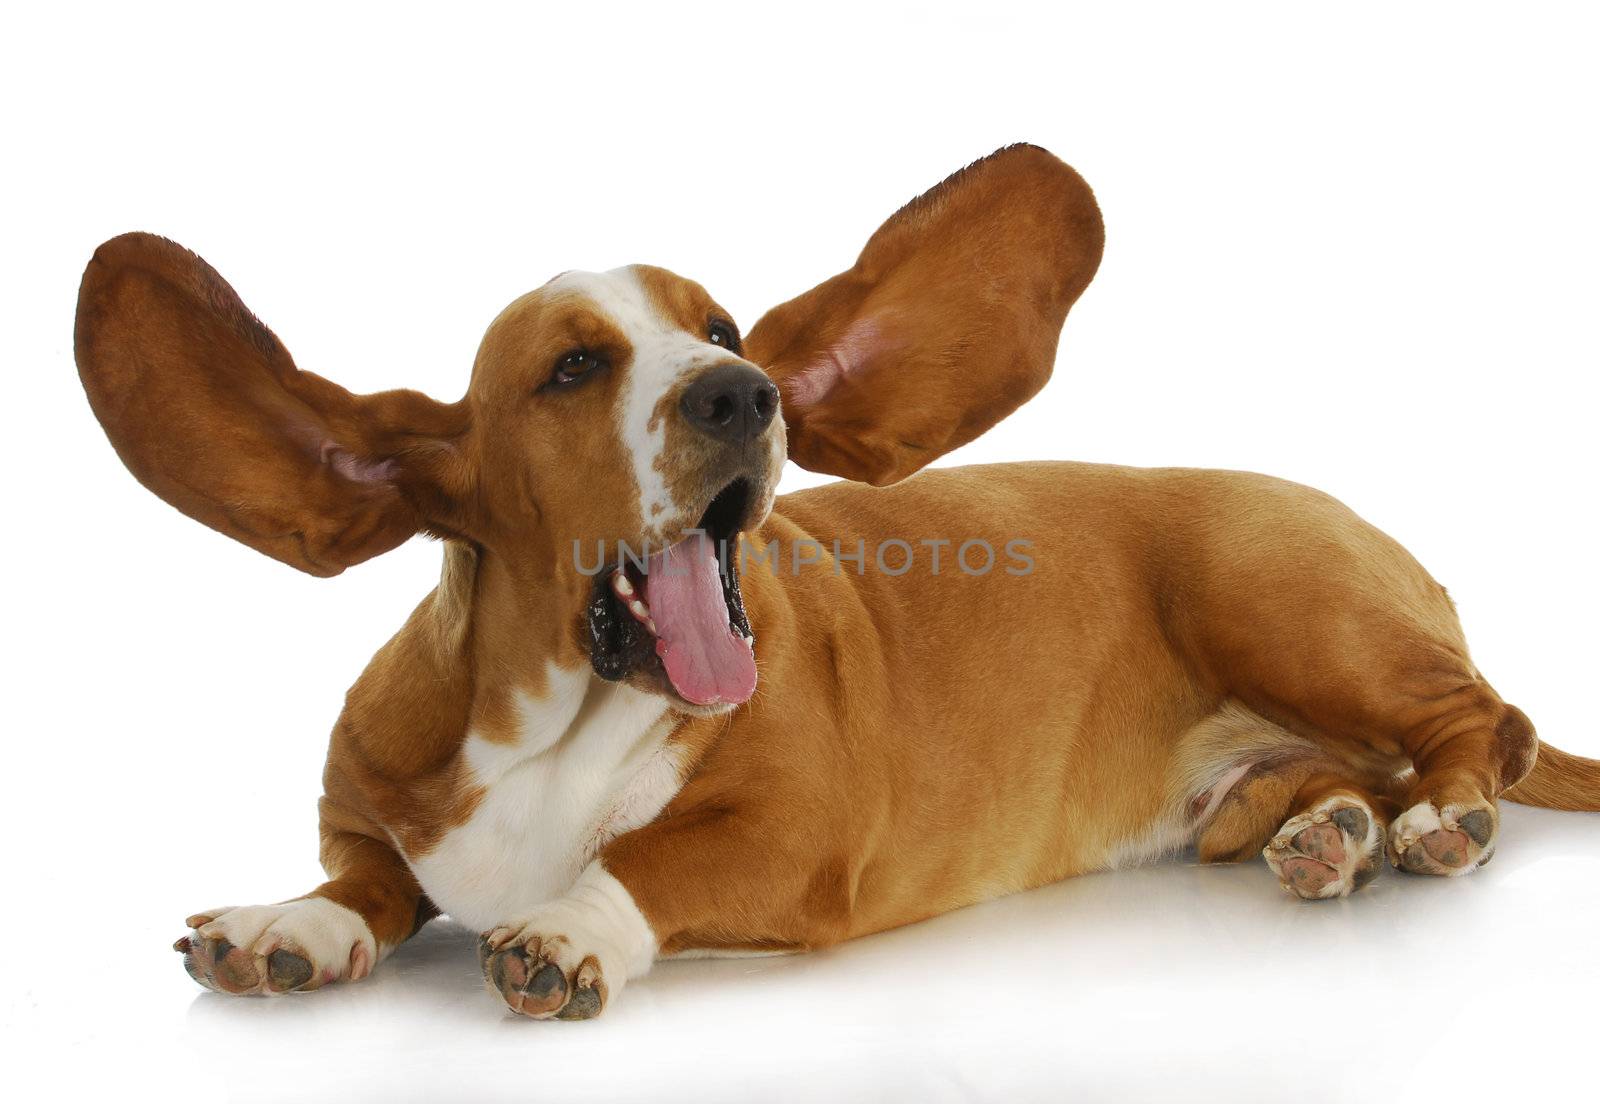 complaining dog - basset hound laying down with both ears up and mouth open on white background